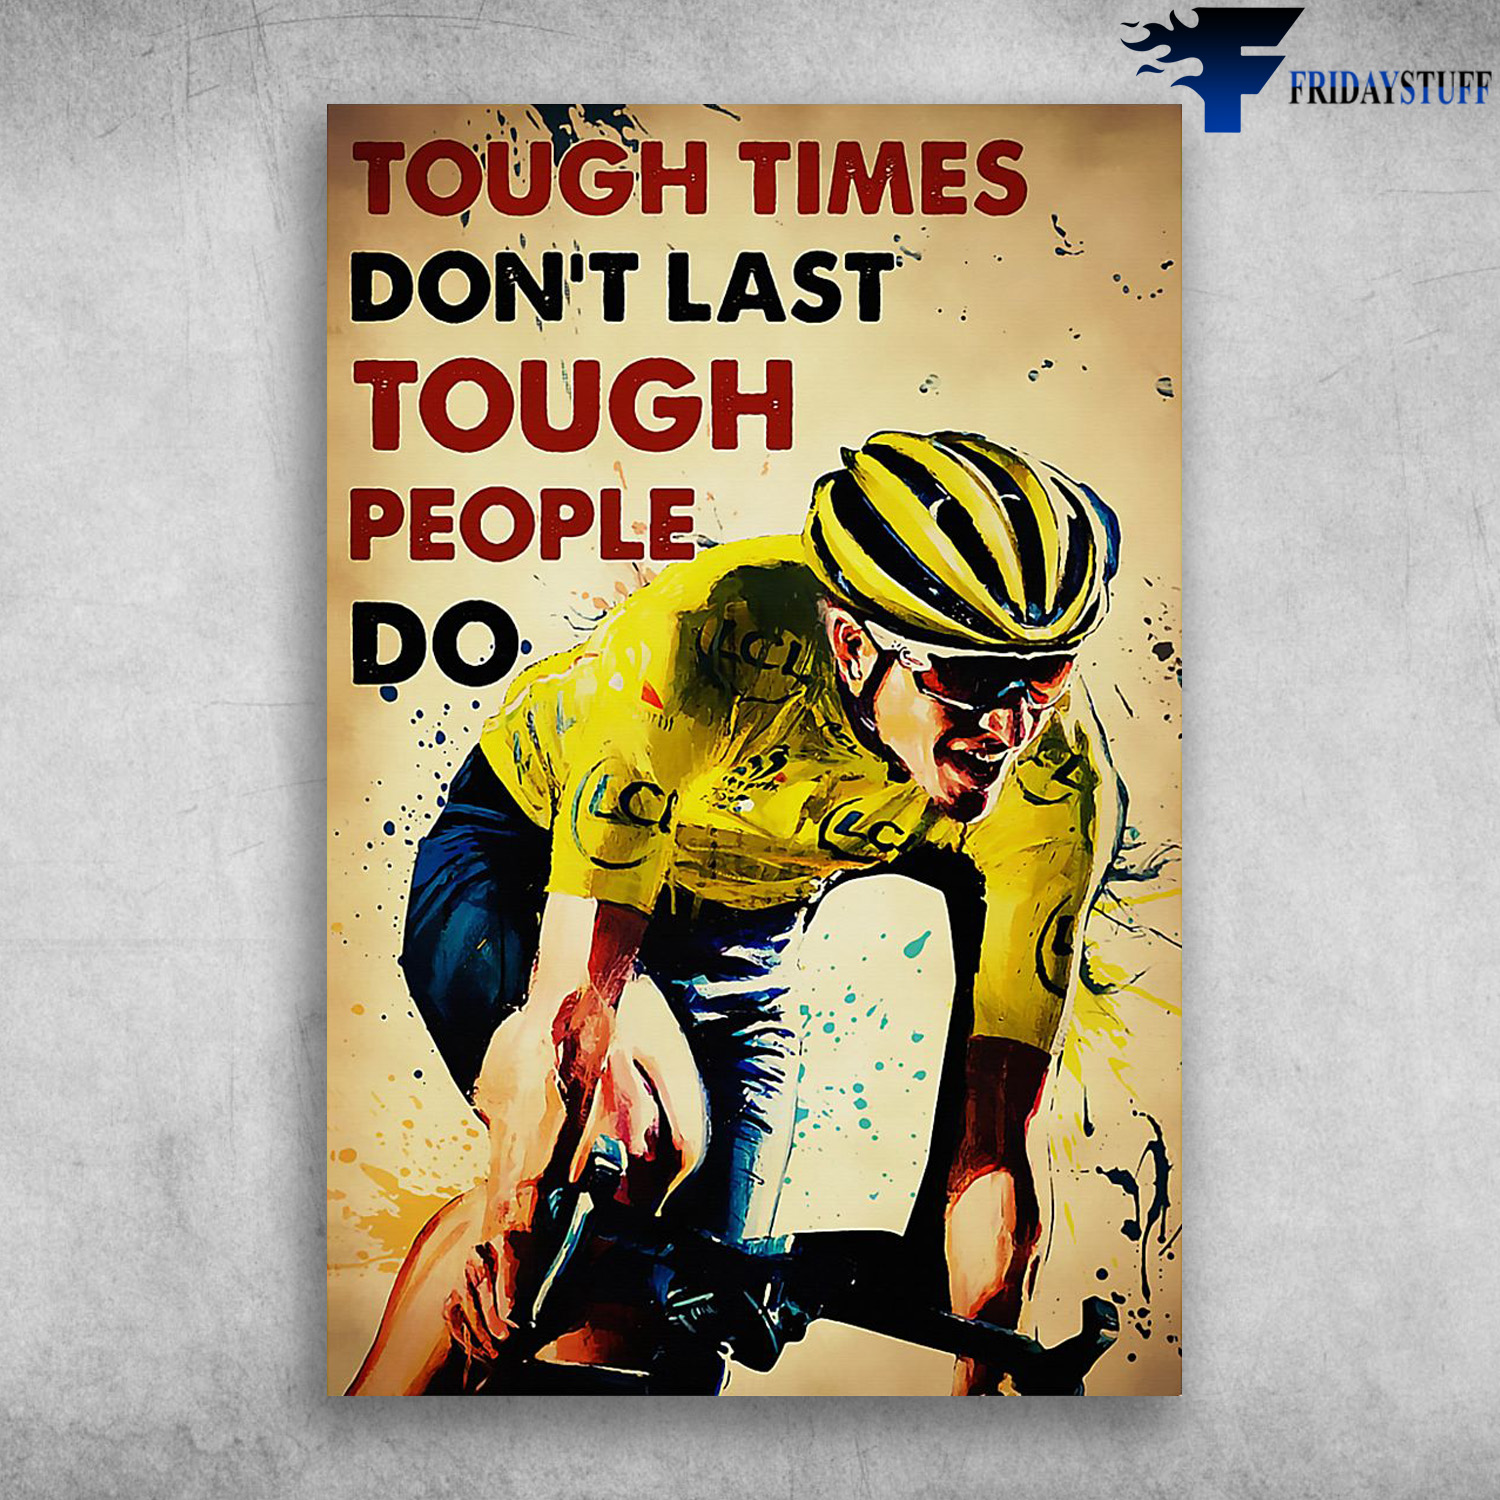 The Man Racing Bicycle - Tough Times Don't Last Tough People Do